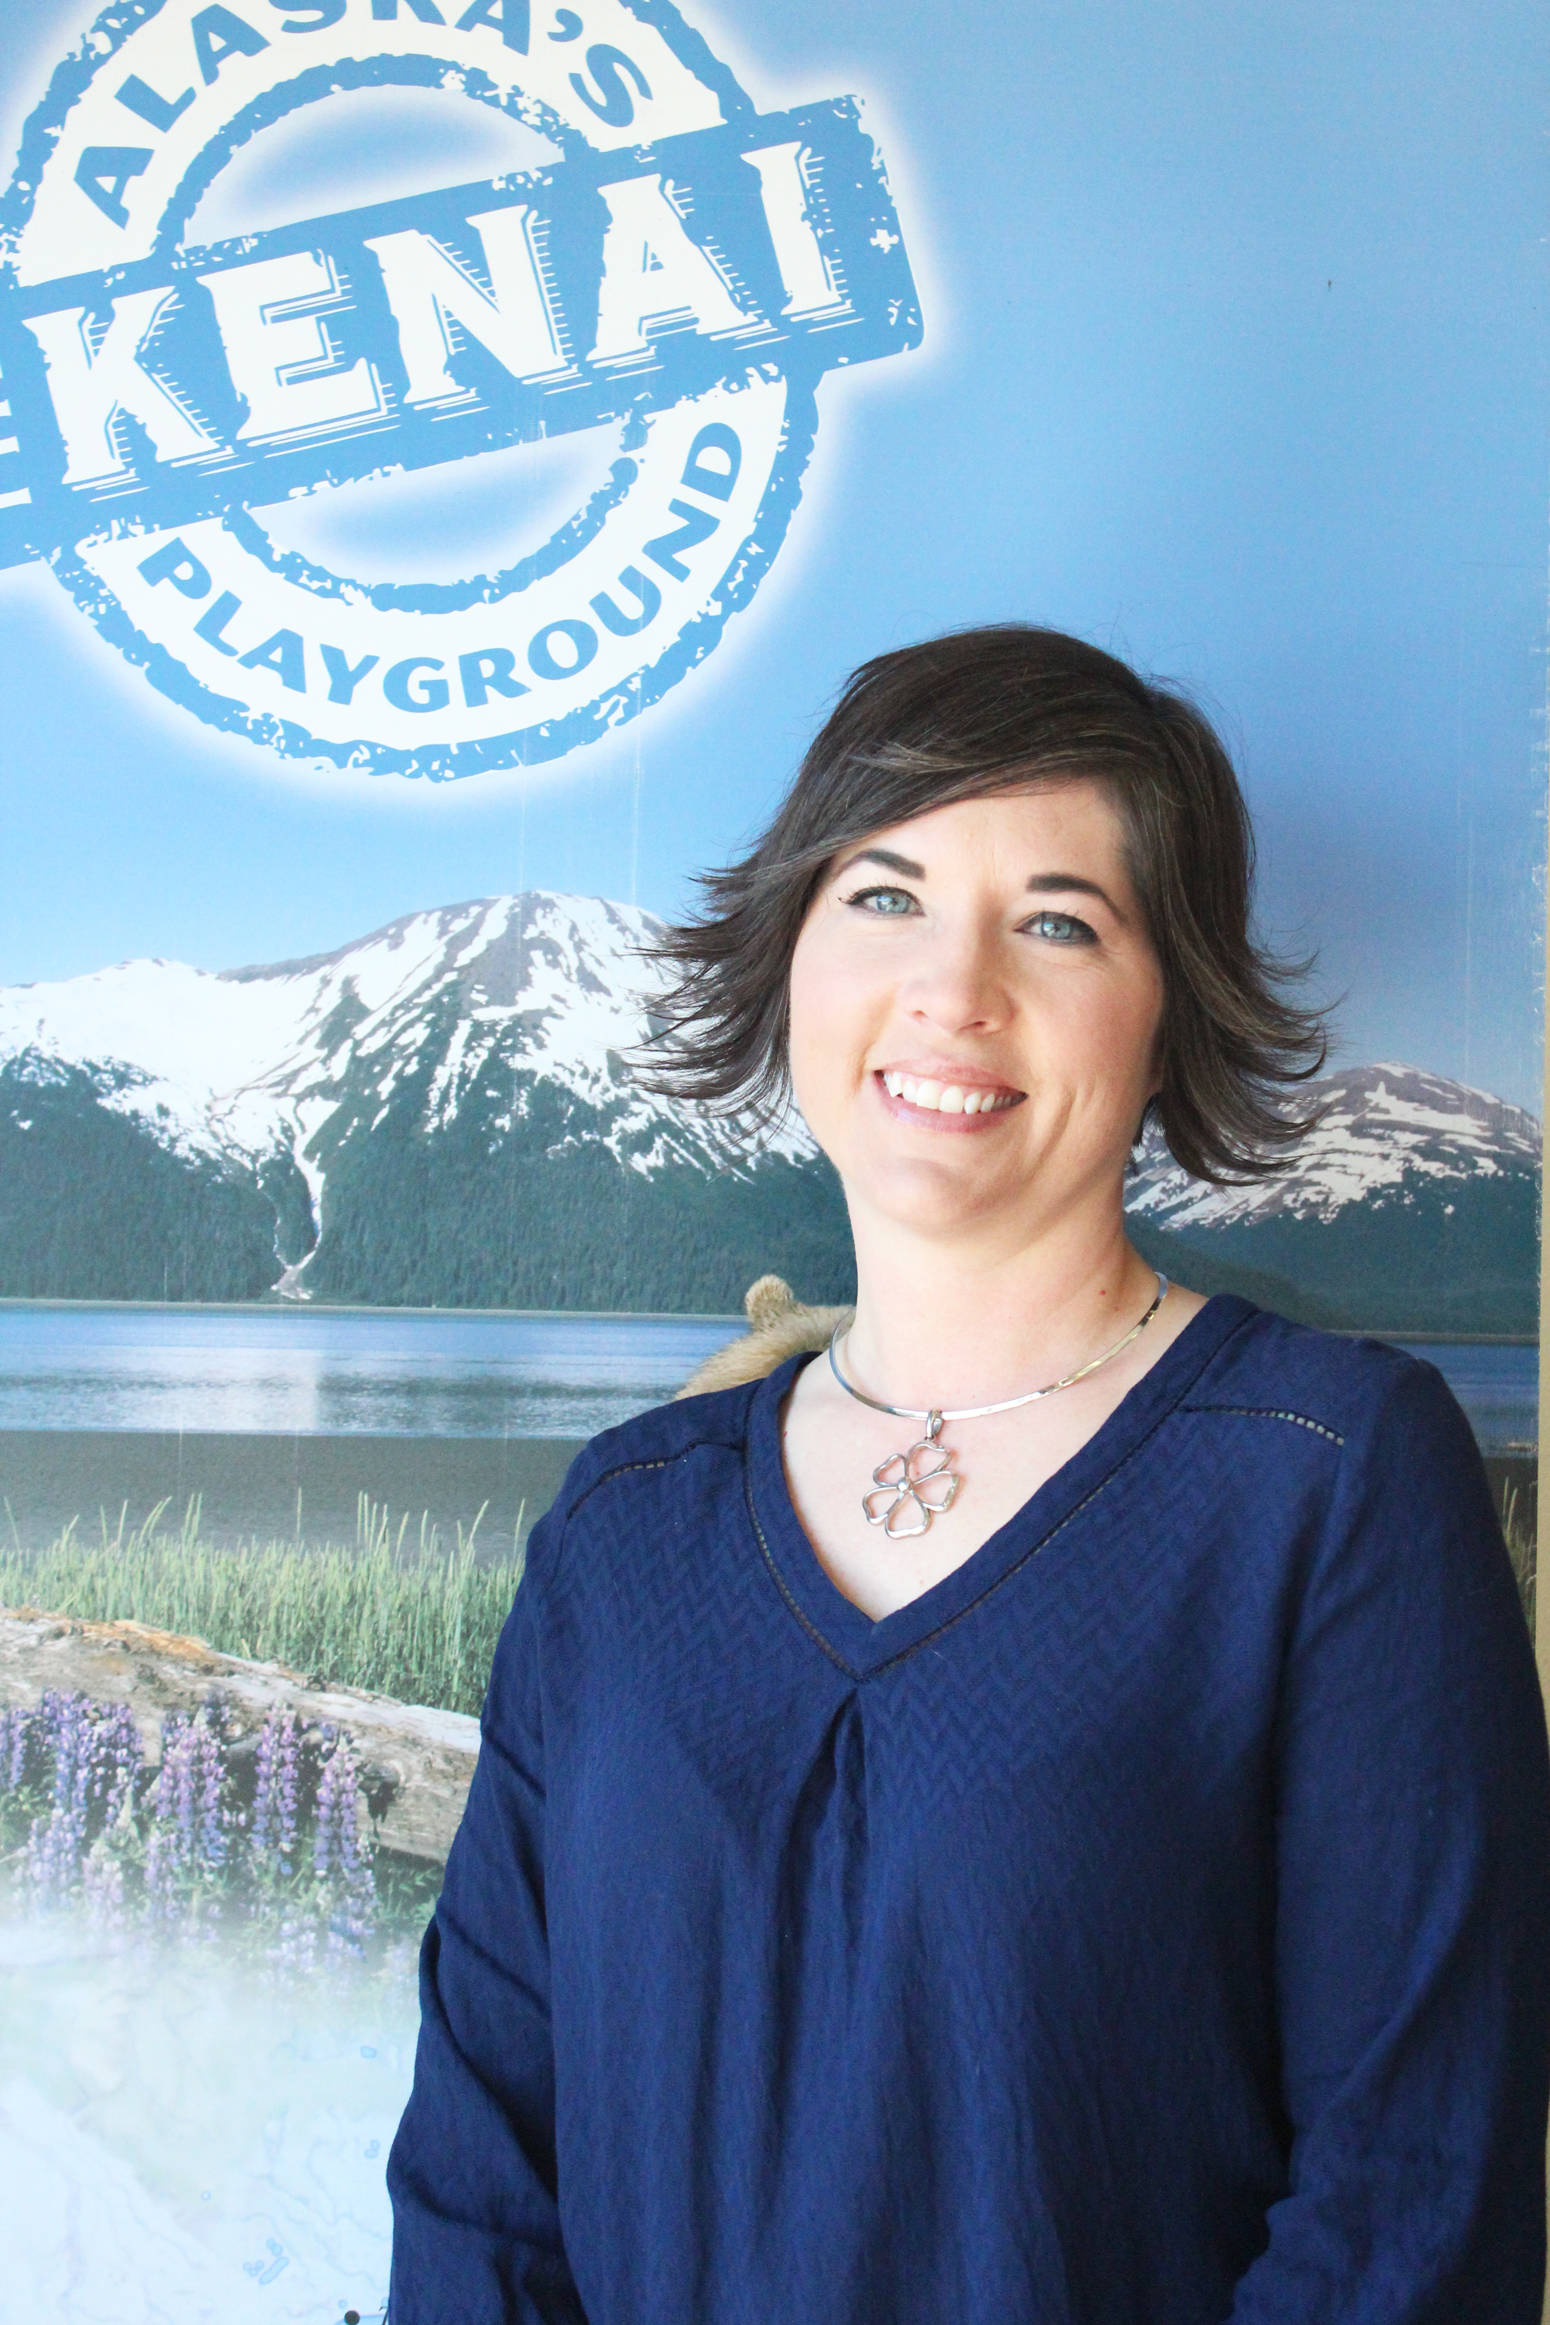 Summer Lazenby, pictured here Thursday, June 15, 2017, is the new executive director of the Kenai Peninsula Tourism Marketing Council. (Megan Pacer/Peninsula Clarion)